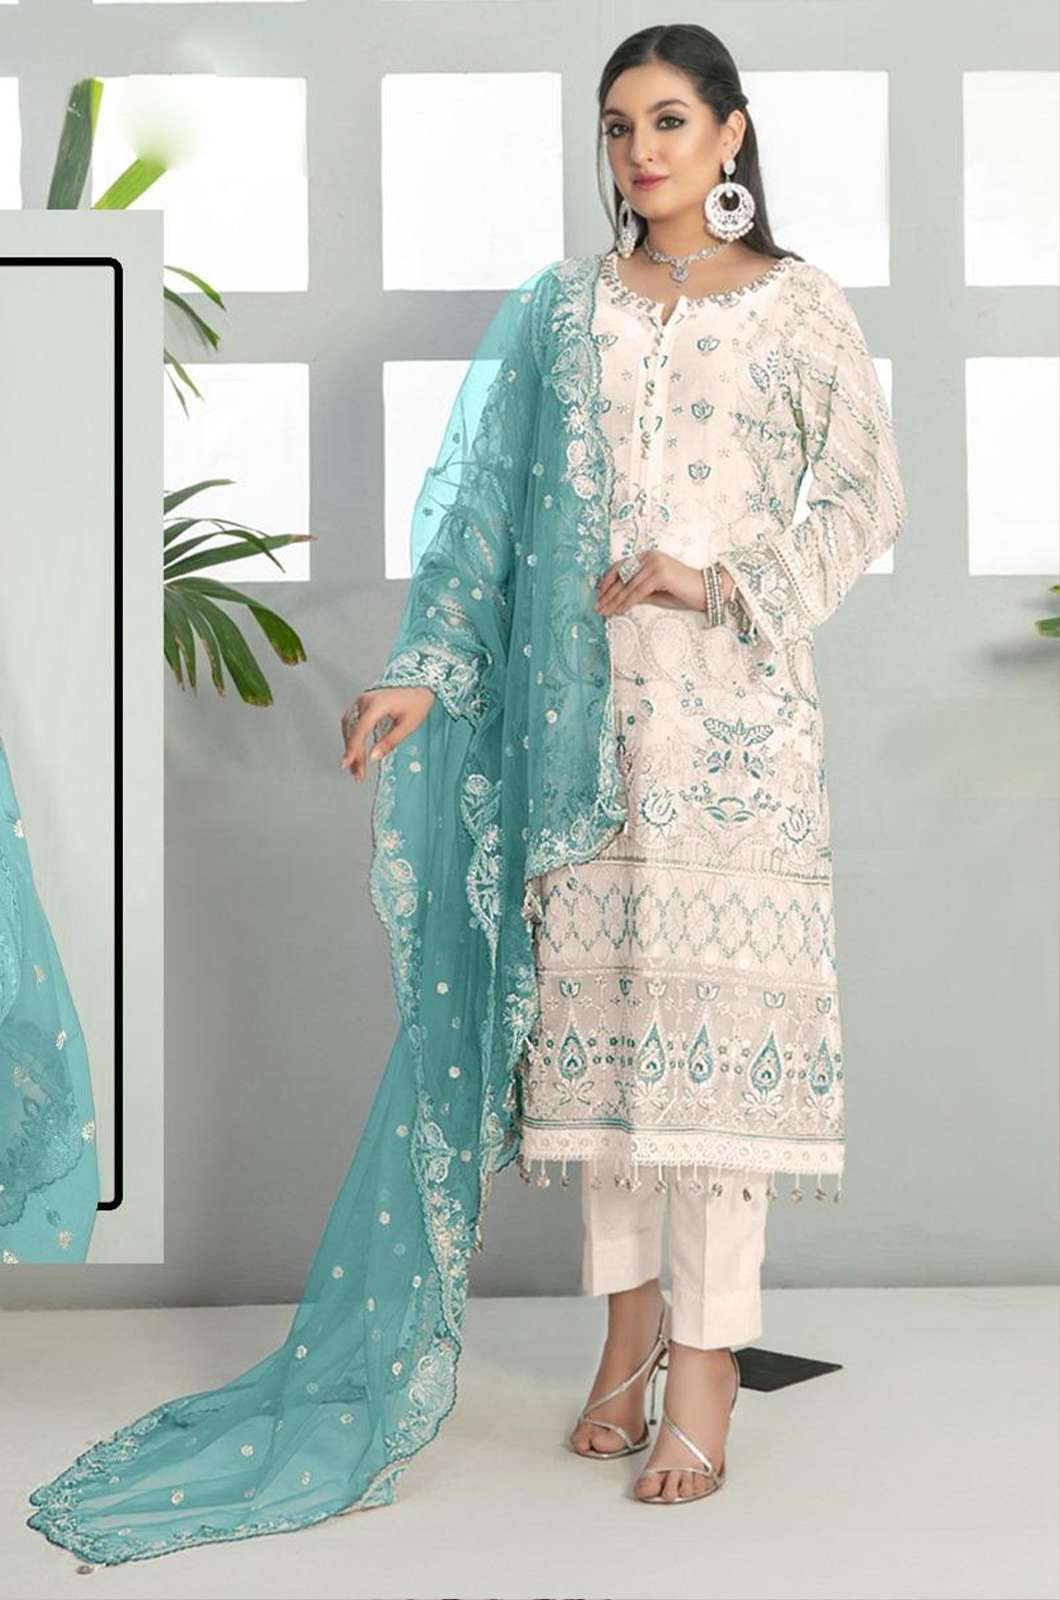 HOOR TEX H 231 A To C Embroidered Faux Georgette Pakistani Suit